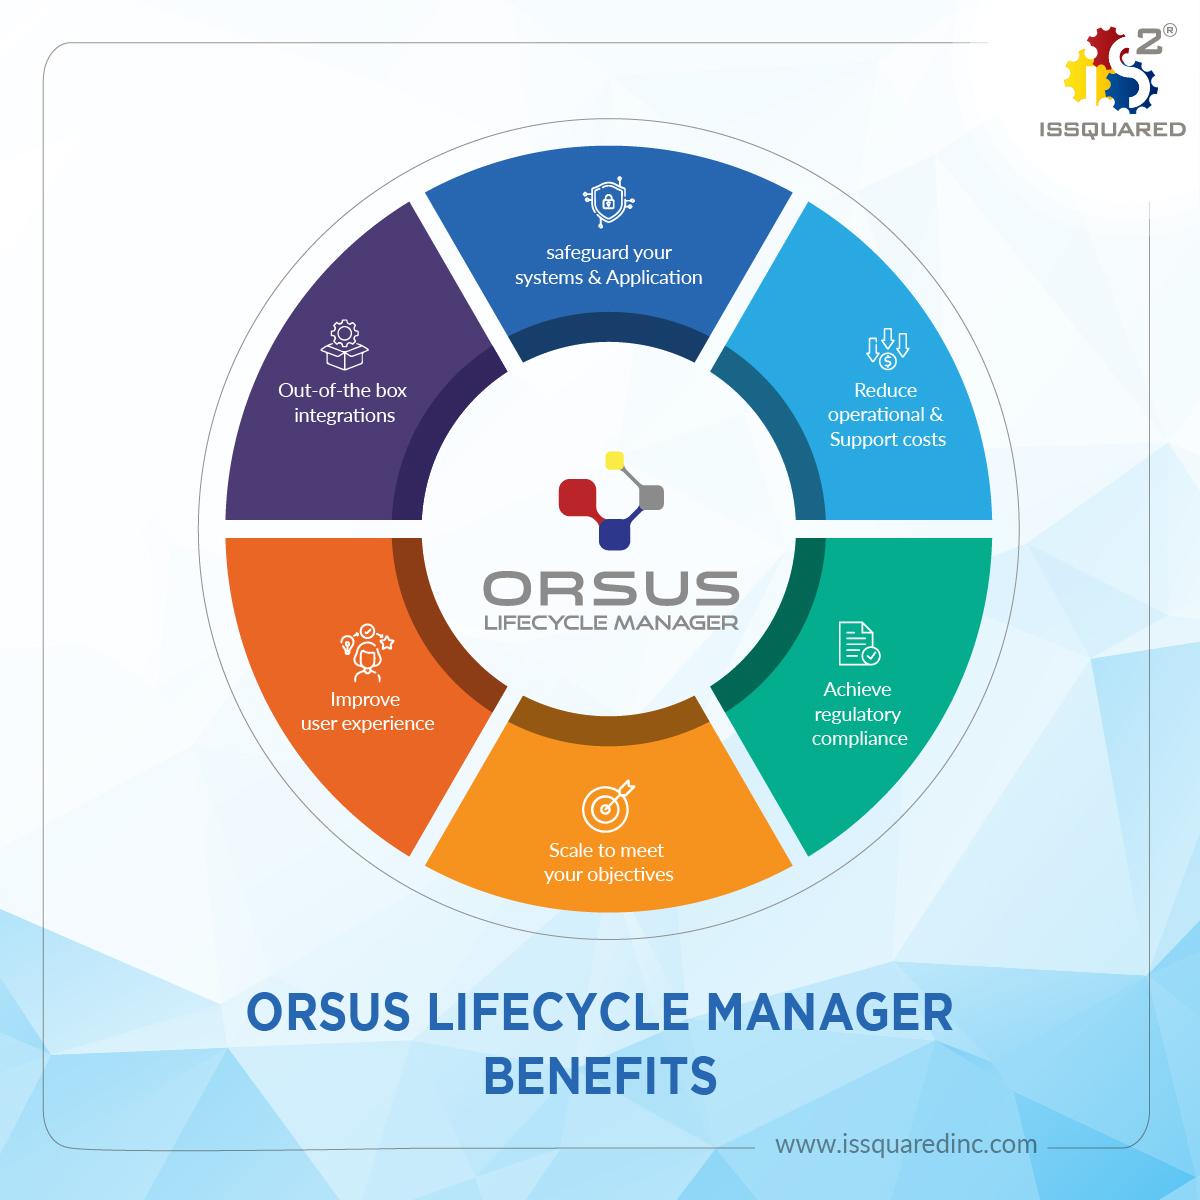 Benefits of ORSUS Identity Access and Governance (IAG)